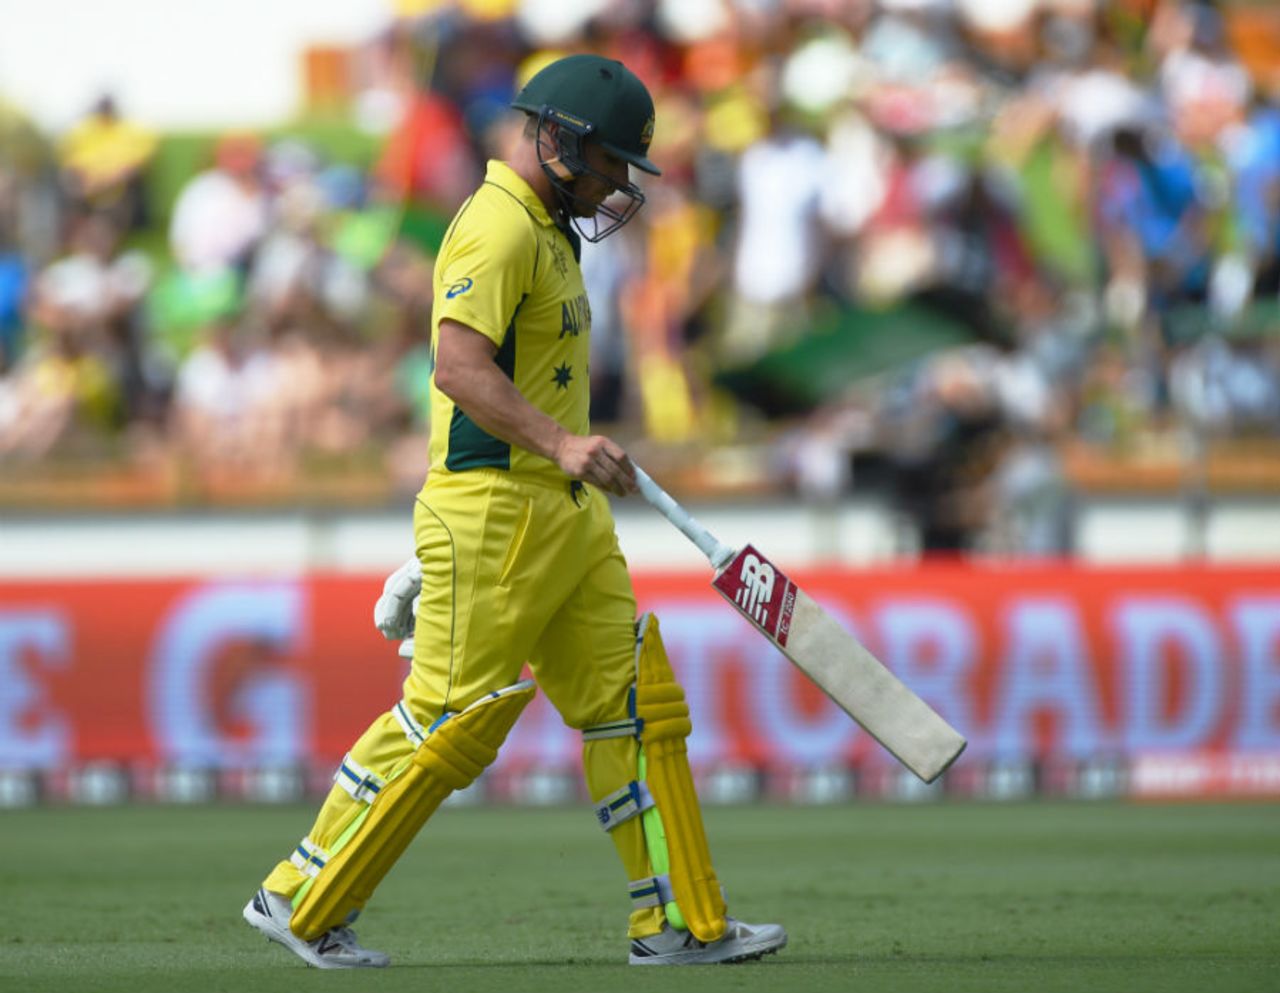 Aaron Finch walks off after being dismissed for 4, Australia v Afghanistan, World Cup 2015, Group A, Perth, March 4, 2015